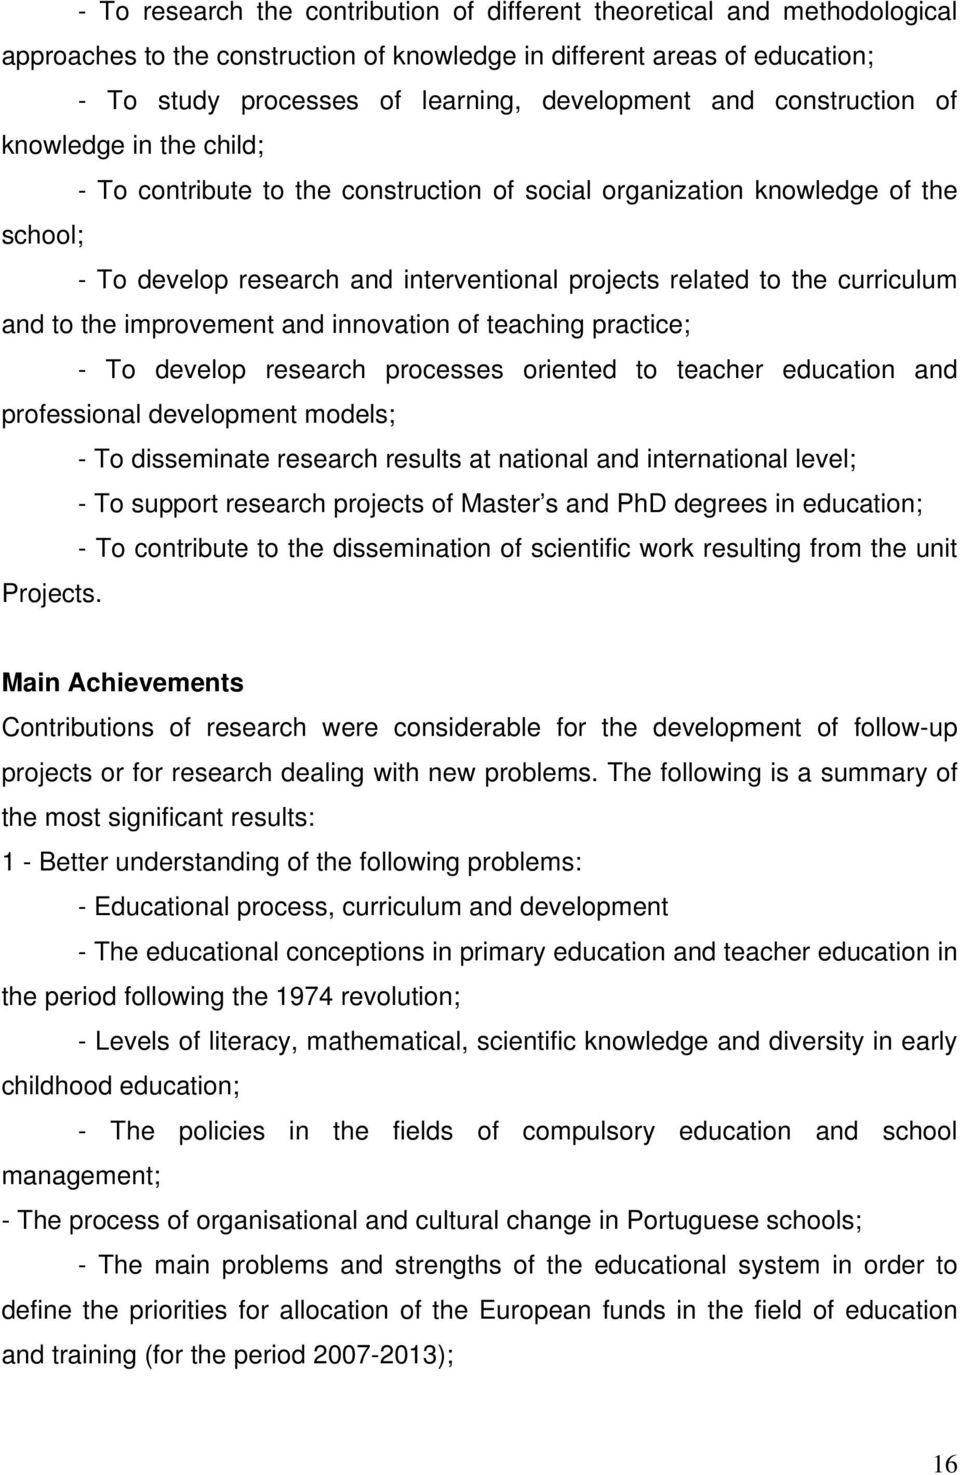 curriculum and to the improvement and innovation of teaching practice; - To develop research processes oriented to teacher education and professional development models; - To disseminate research